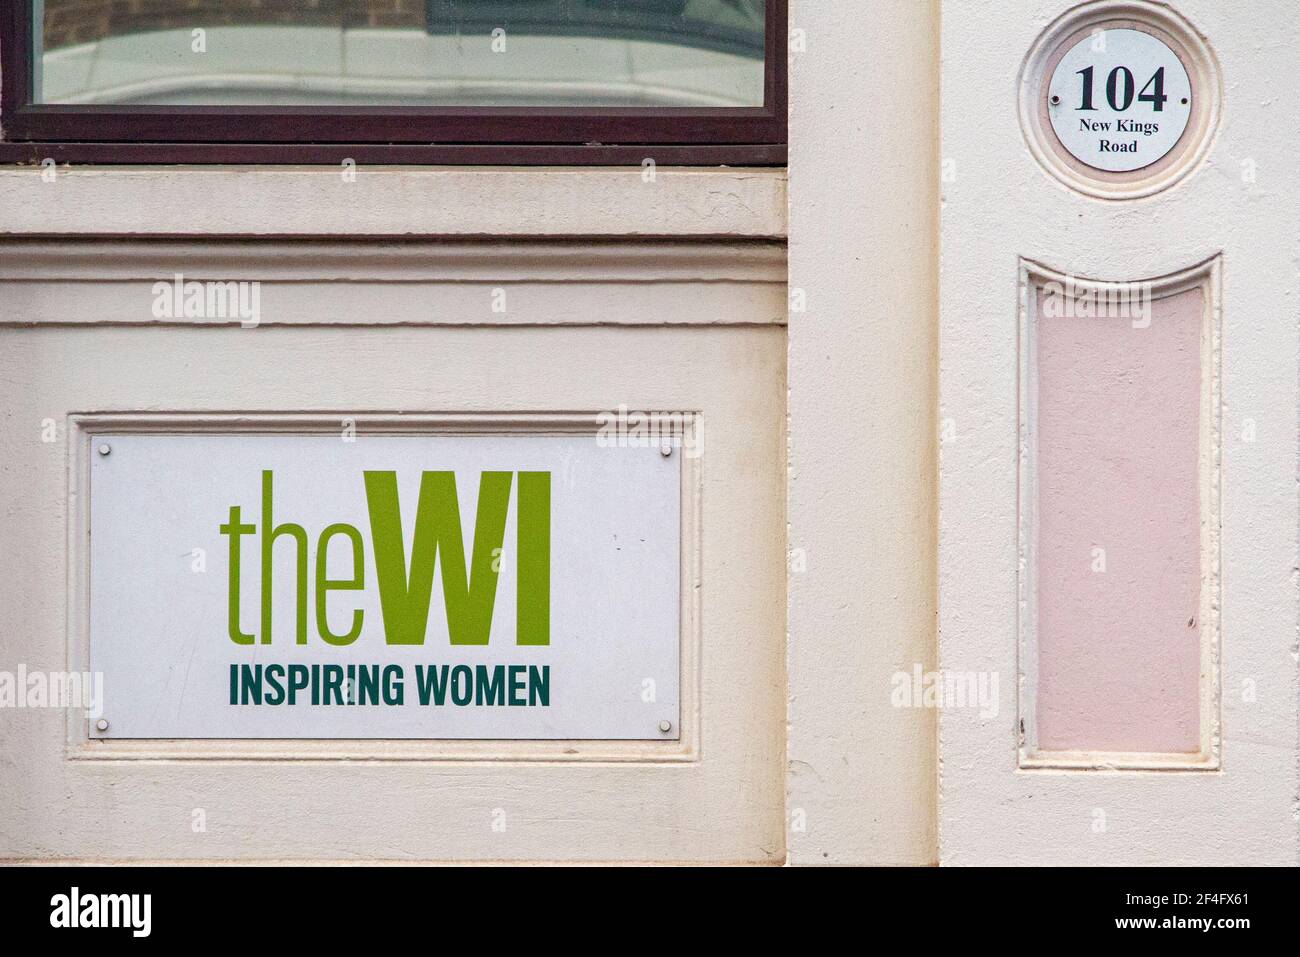 A Women's Institute sign on the New King's Road in London Stock Photo